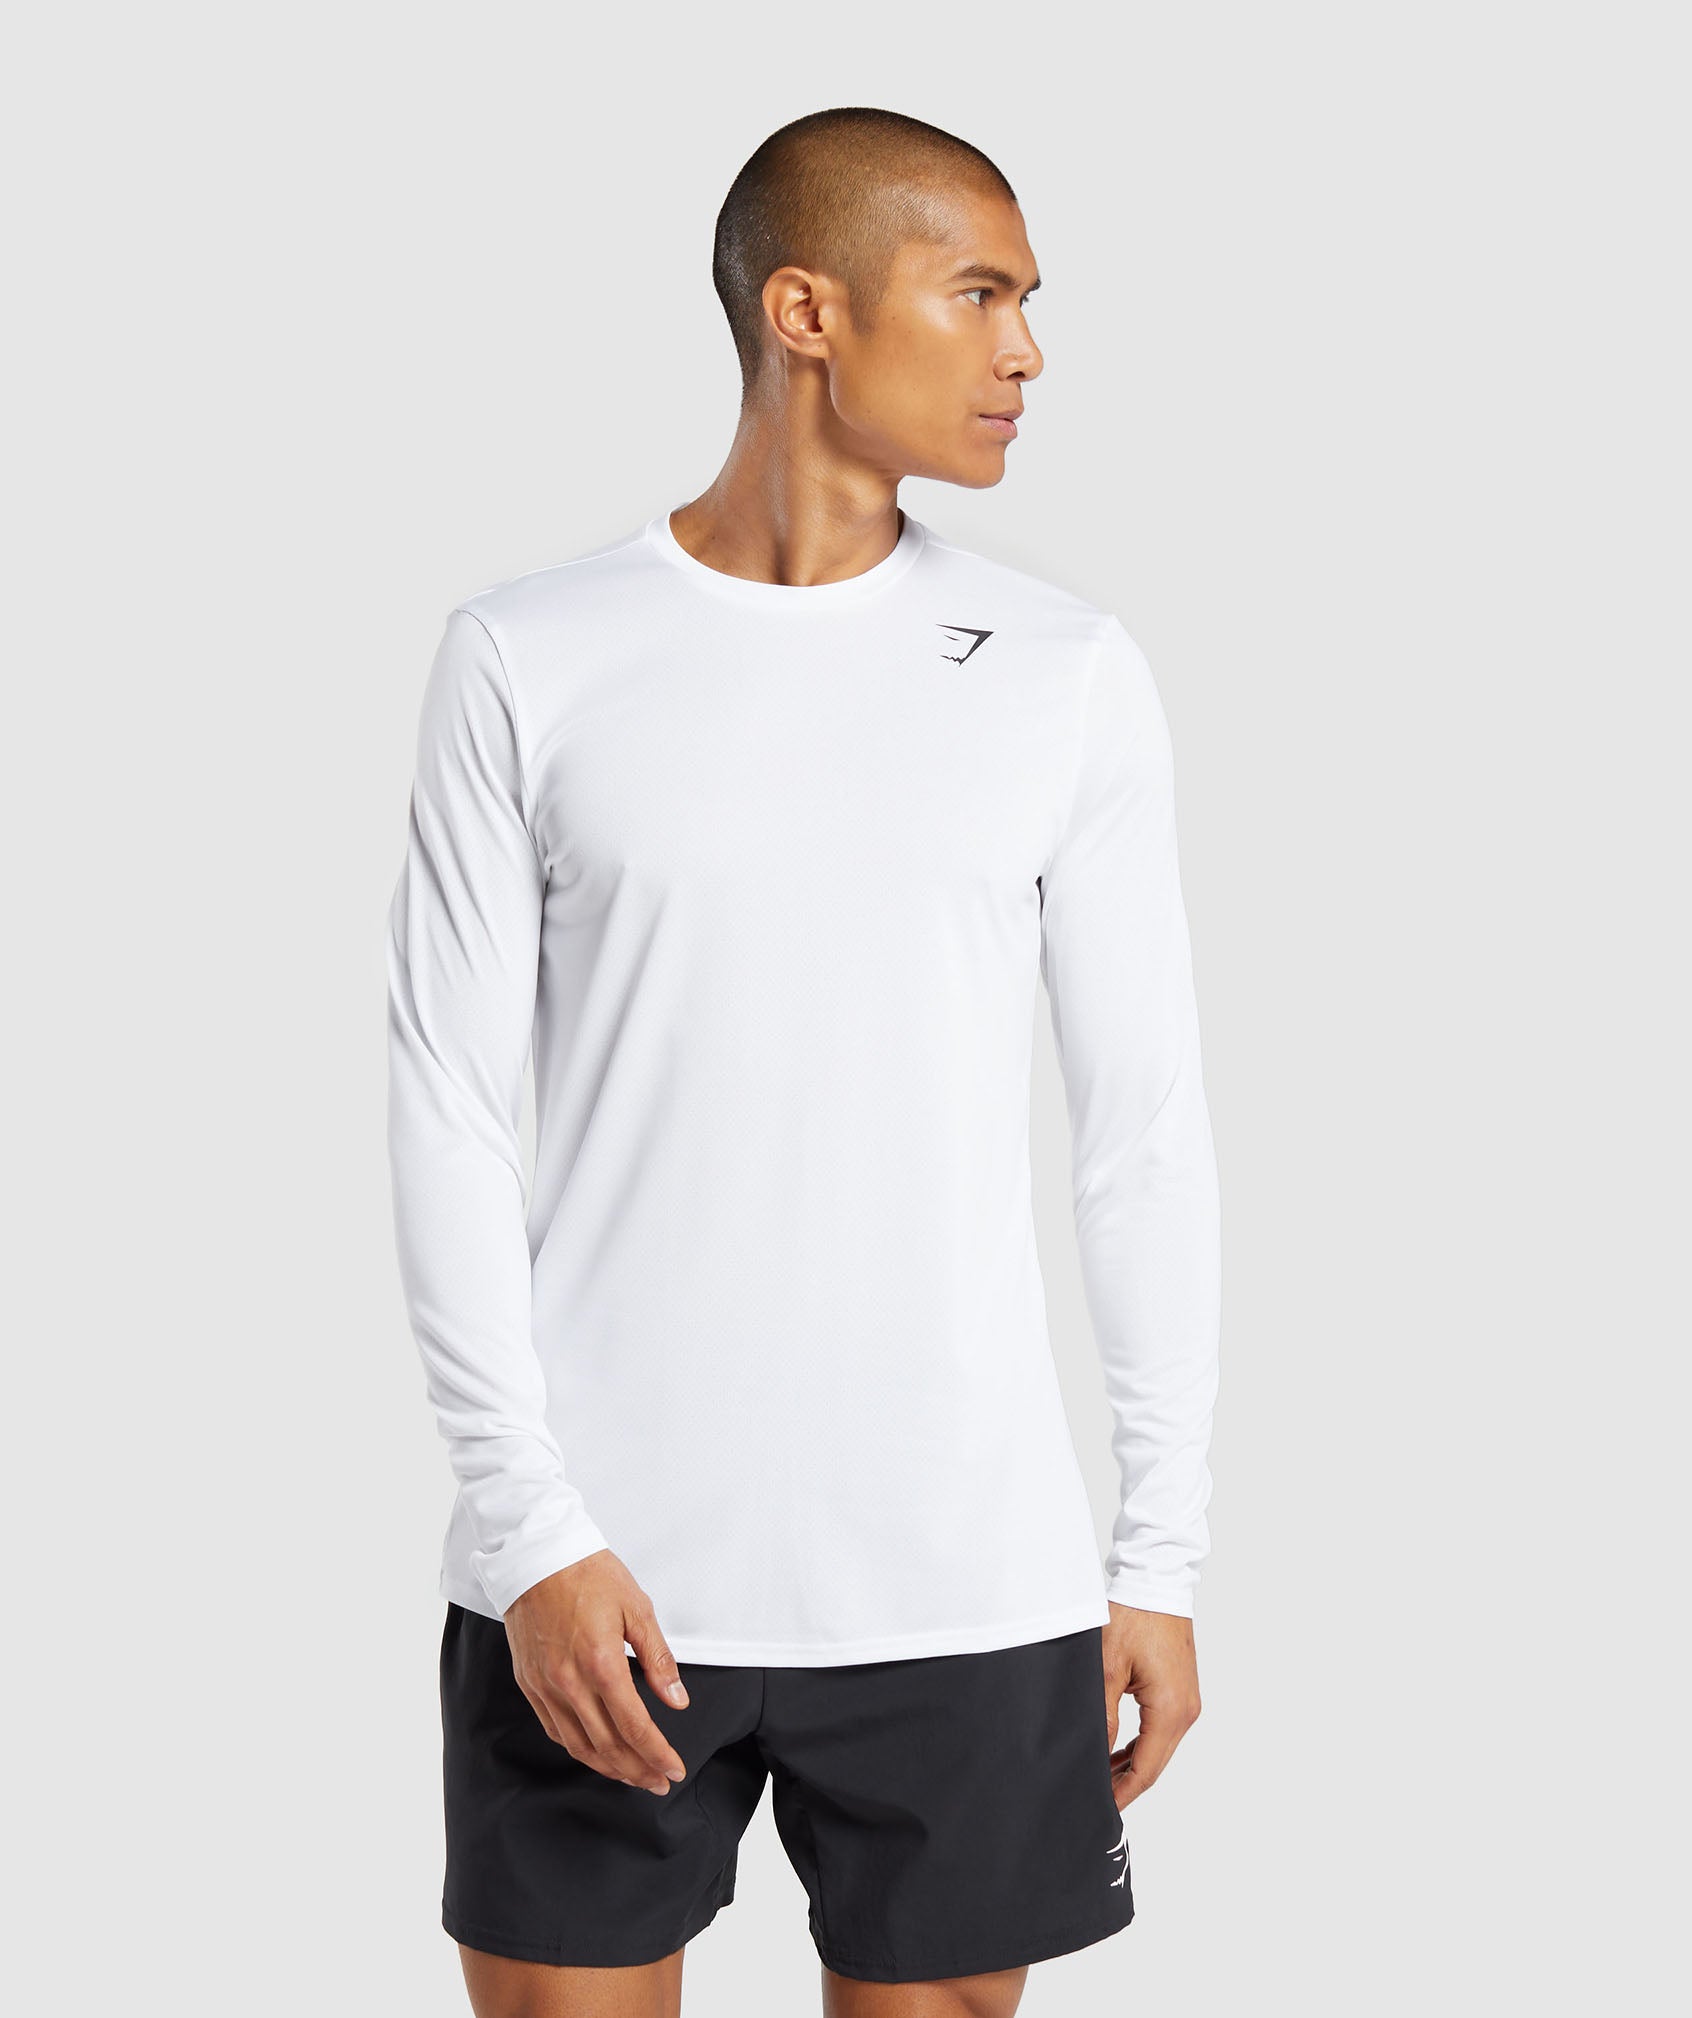 Arrival Long Sleeve T-Shirt in White - view 1